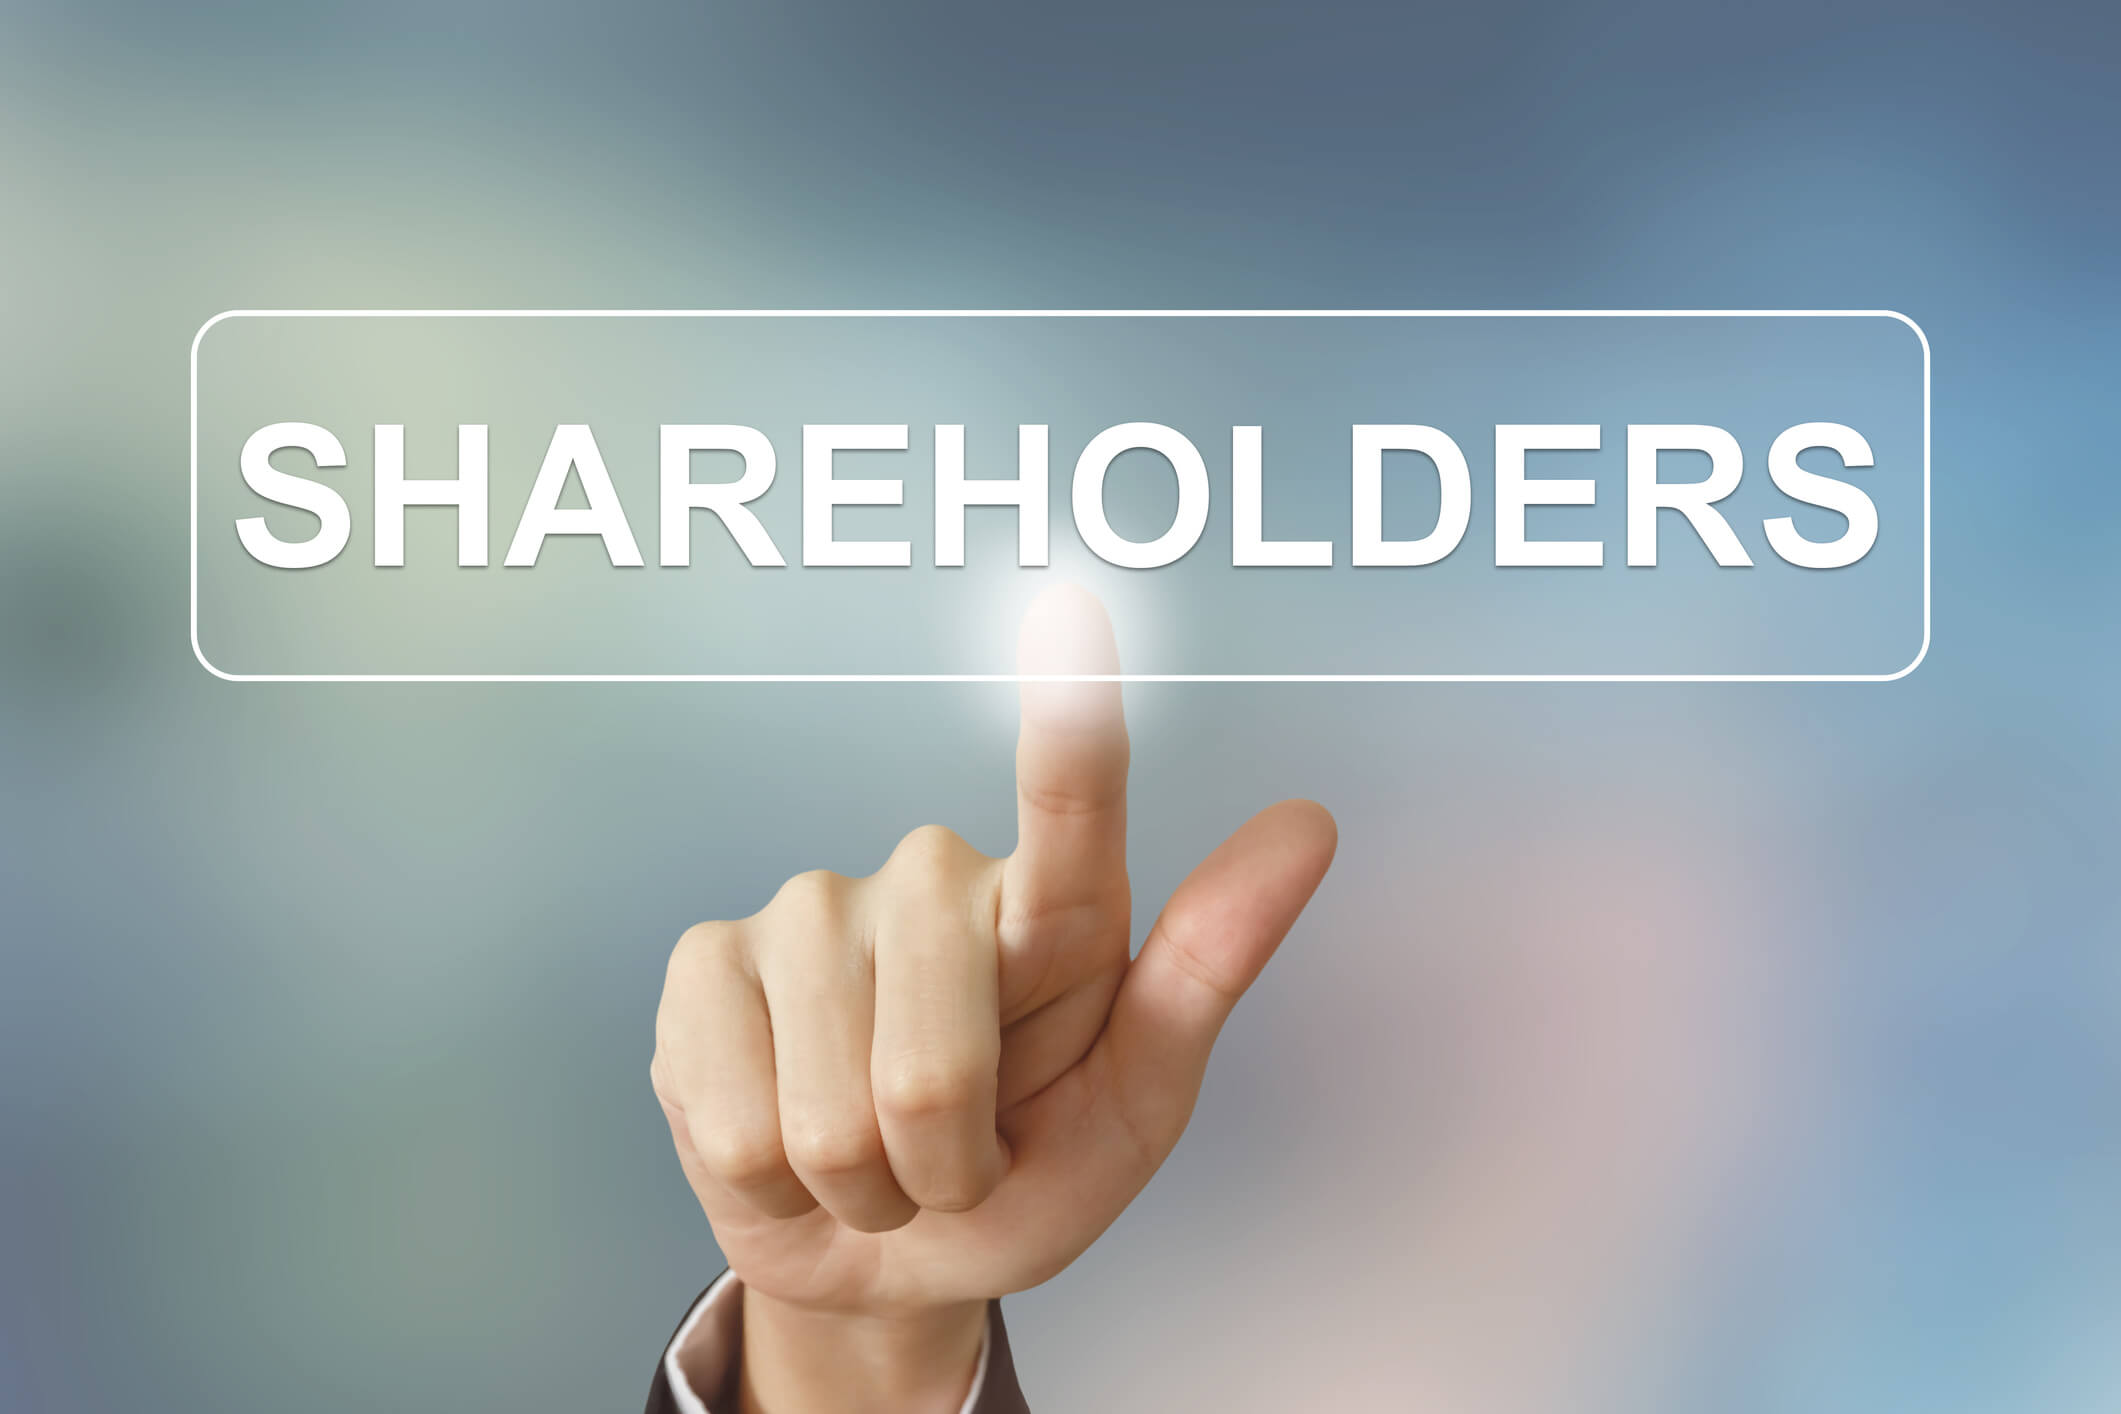 Investors and Shareholders - Complete Controller